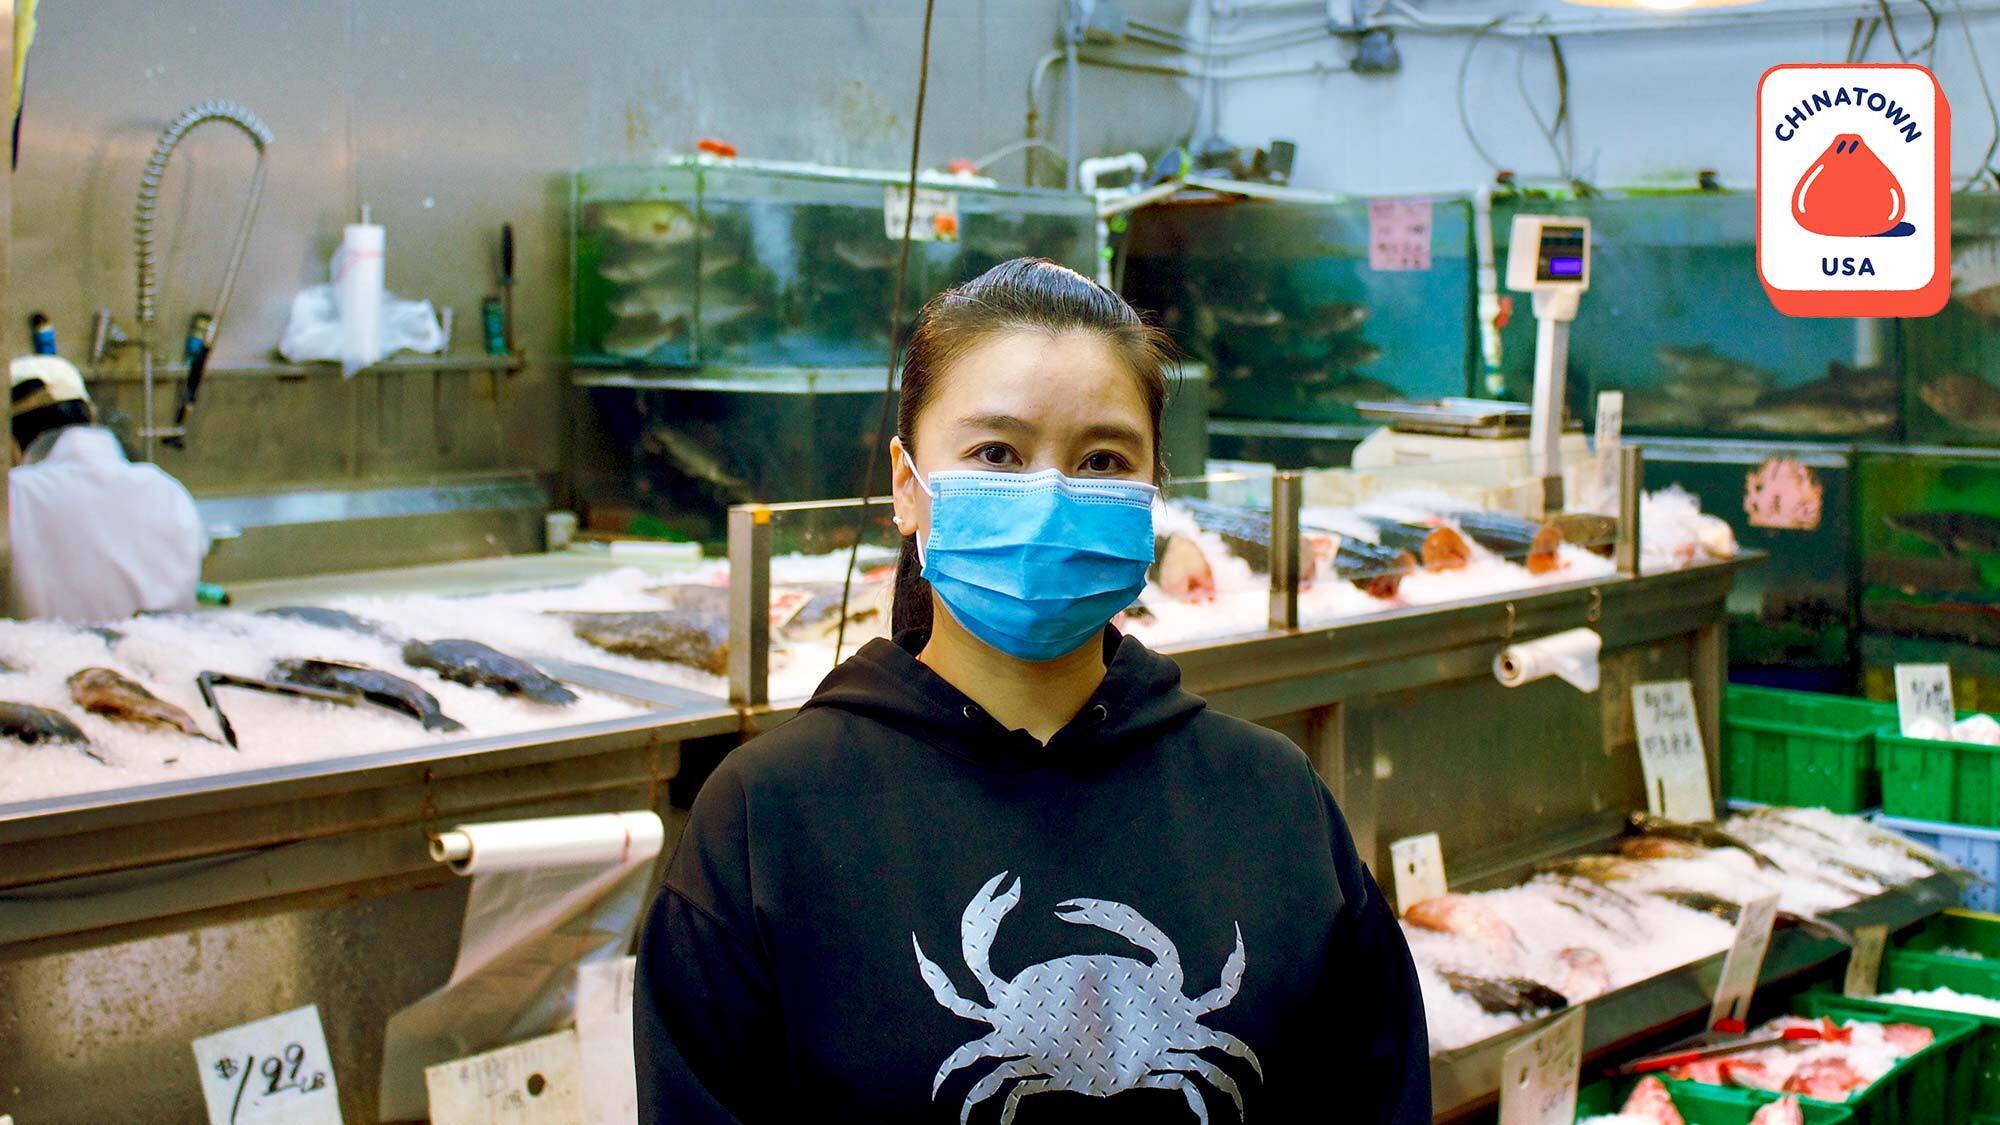 Finnie Phung in front of the seafood counter at her family's business, Green Fish Market. // Photo by Momo Chang for Resy